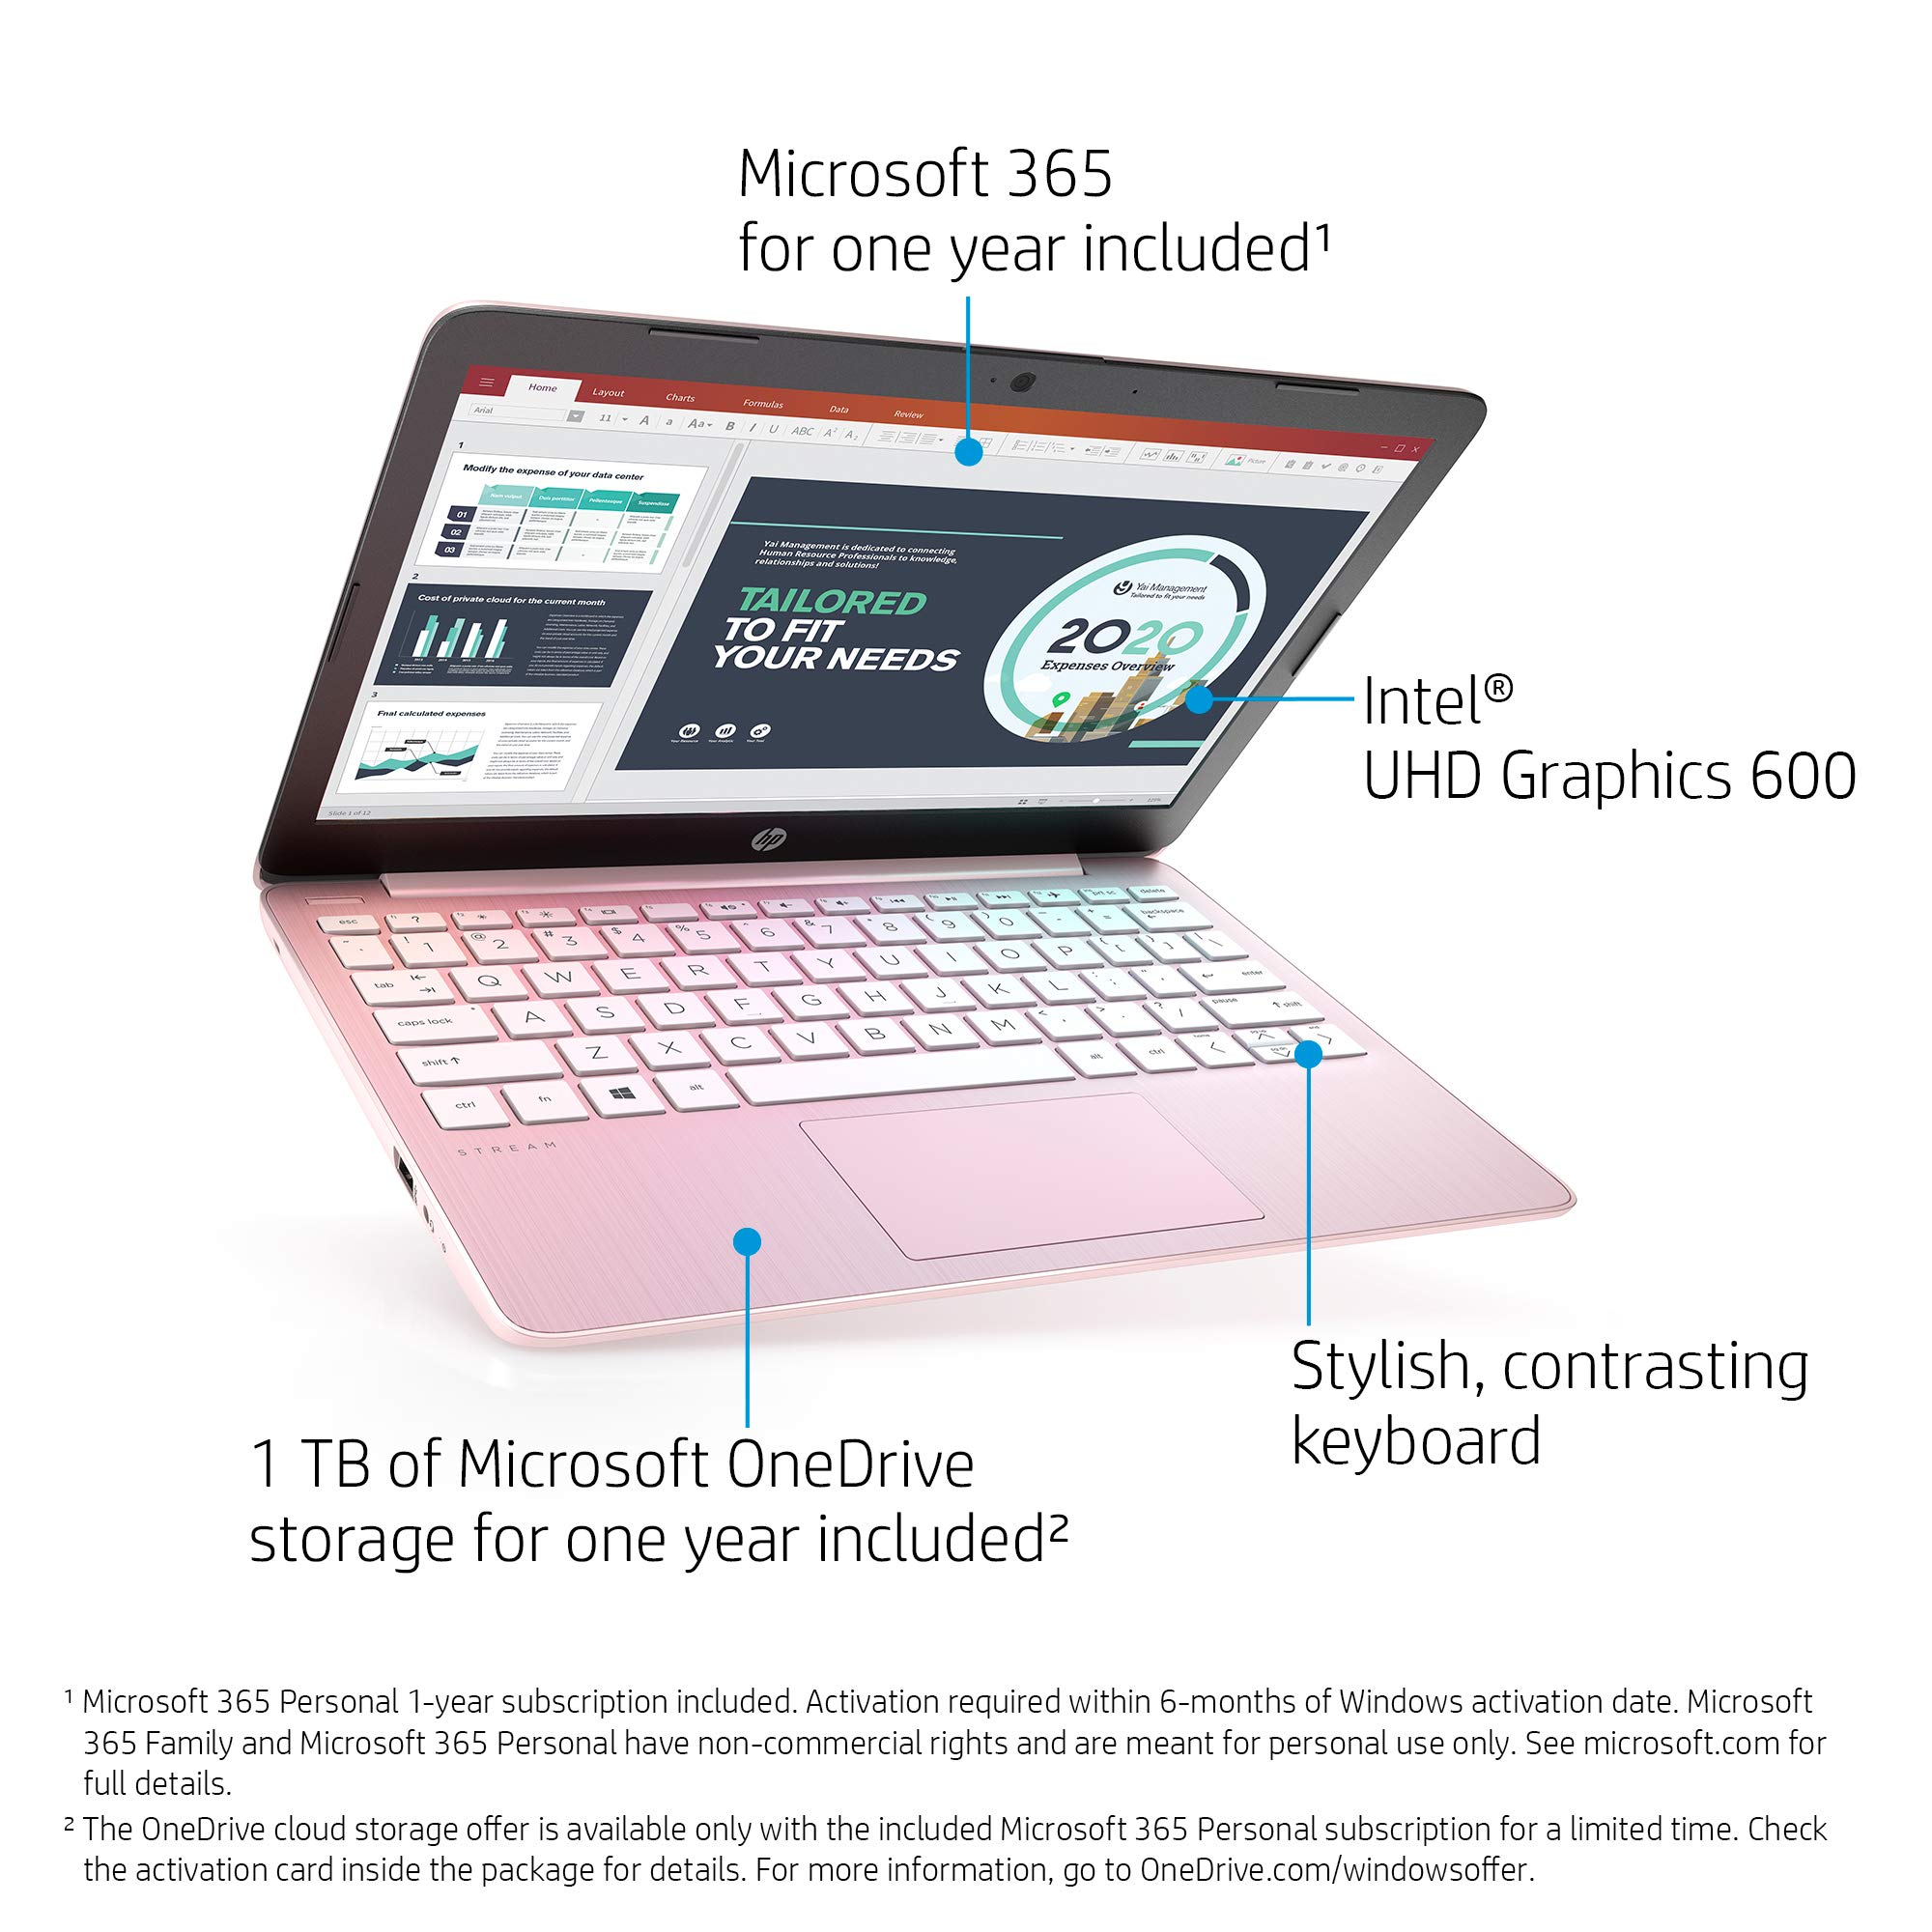 2021 Newest HP Stream 11.6-inch HD Laptop, Intel Celeron N4020, 4GB RAM, 64GB emmc, Windows 10 Home in S Mode with Office 365 Personal for 1 Year, Rose Pink